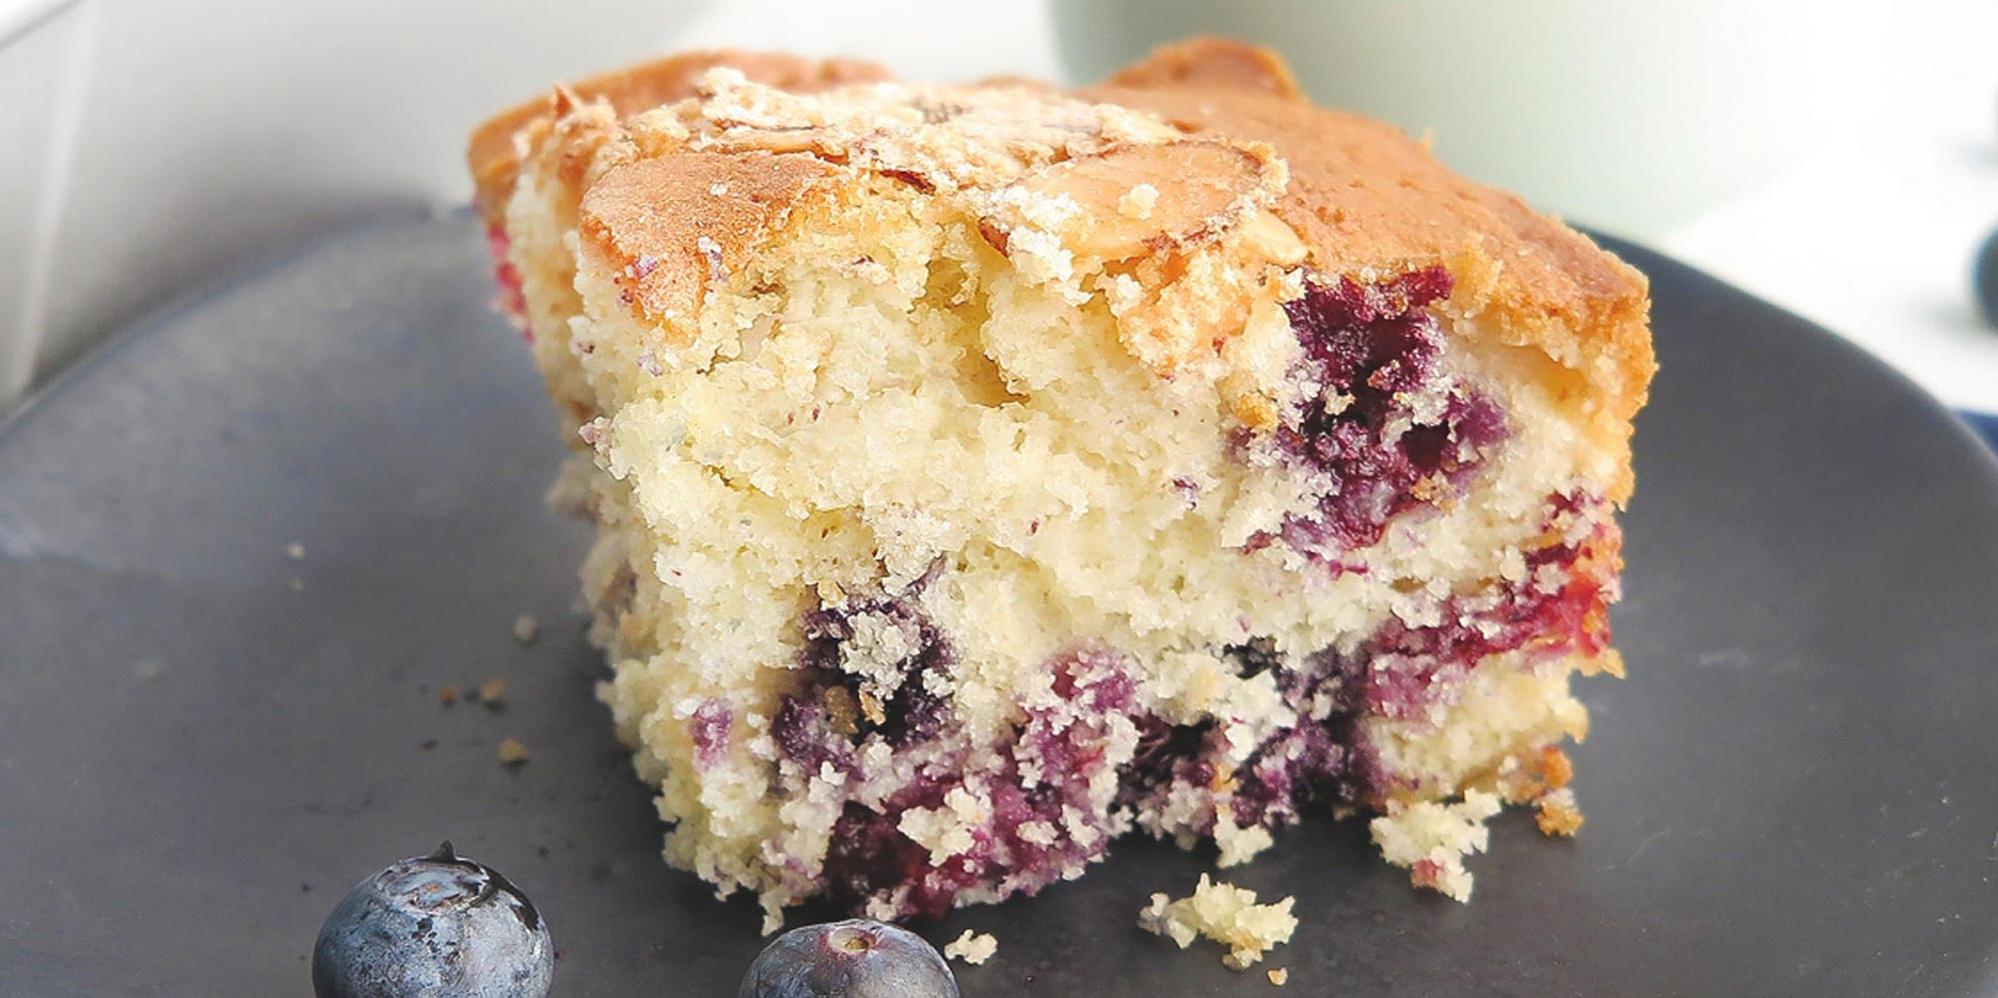  Every slice of this cake is a heavenly fusion of nuttiness and fruity goodness.